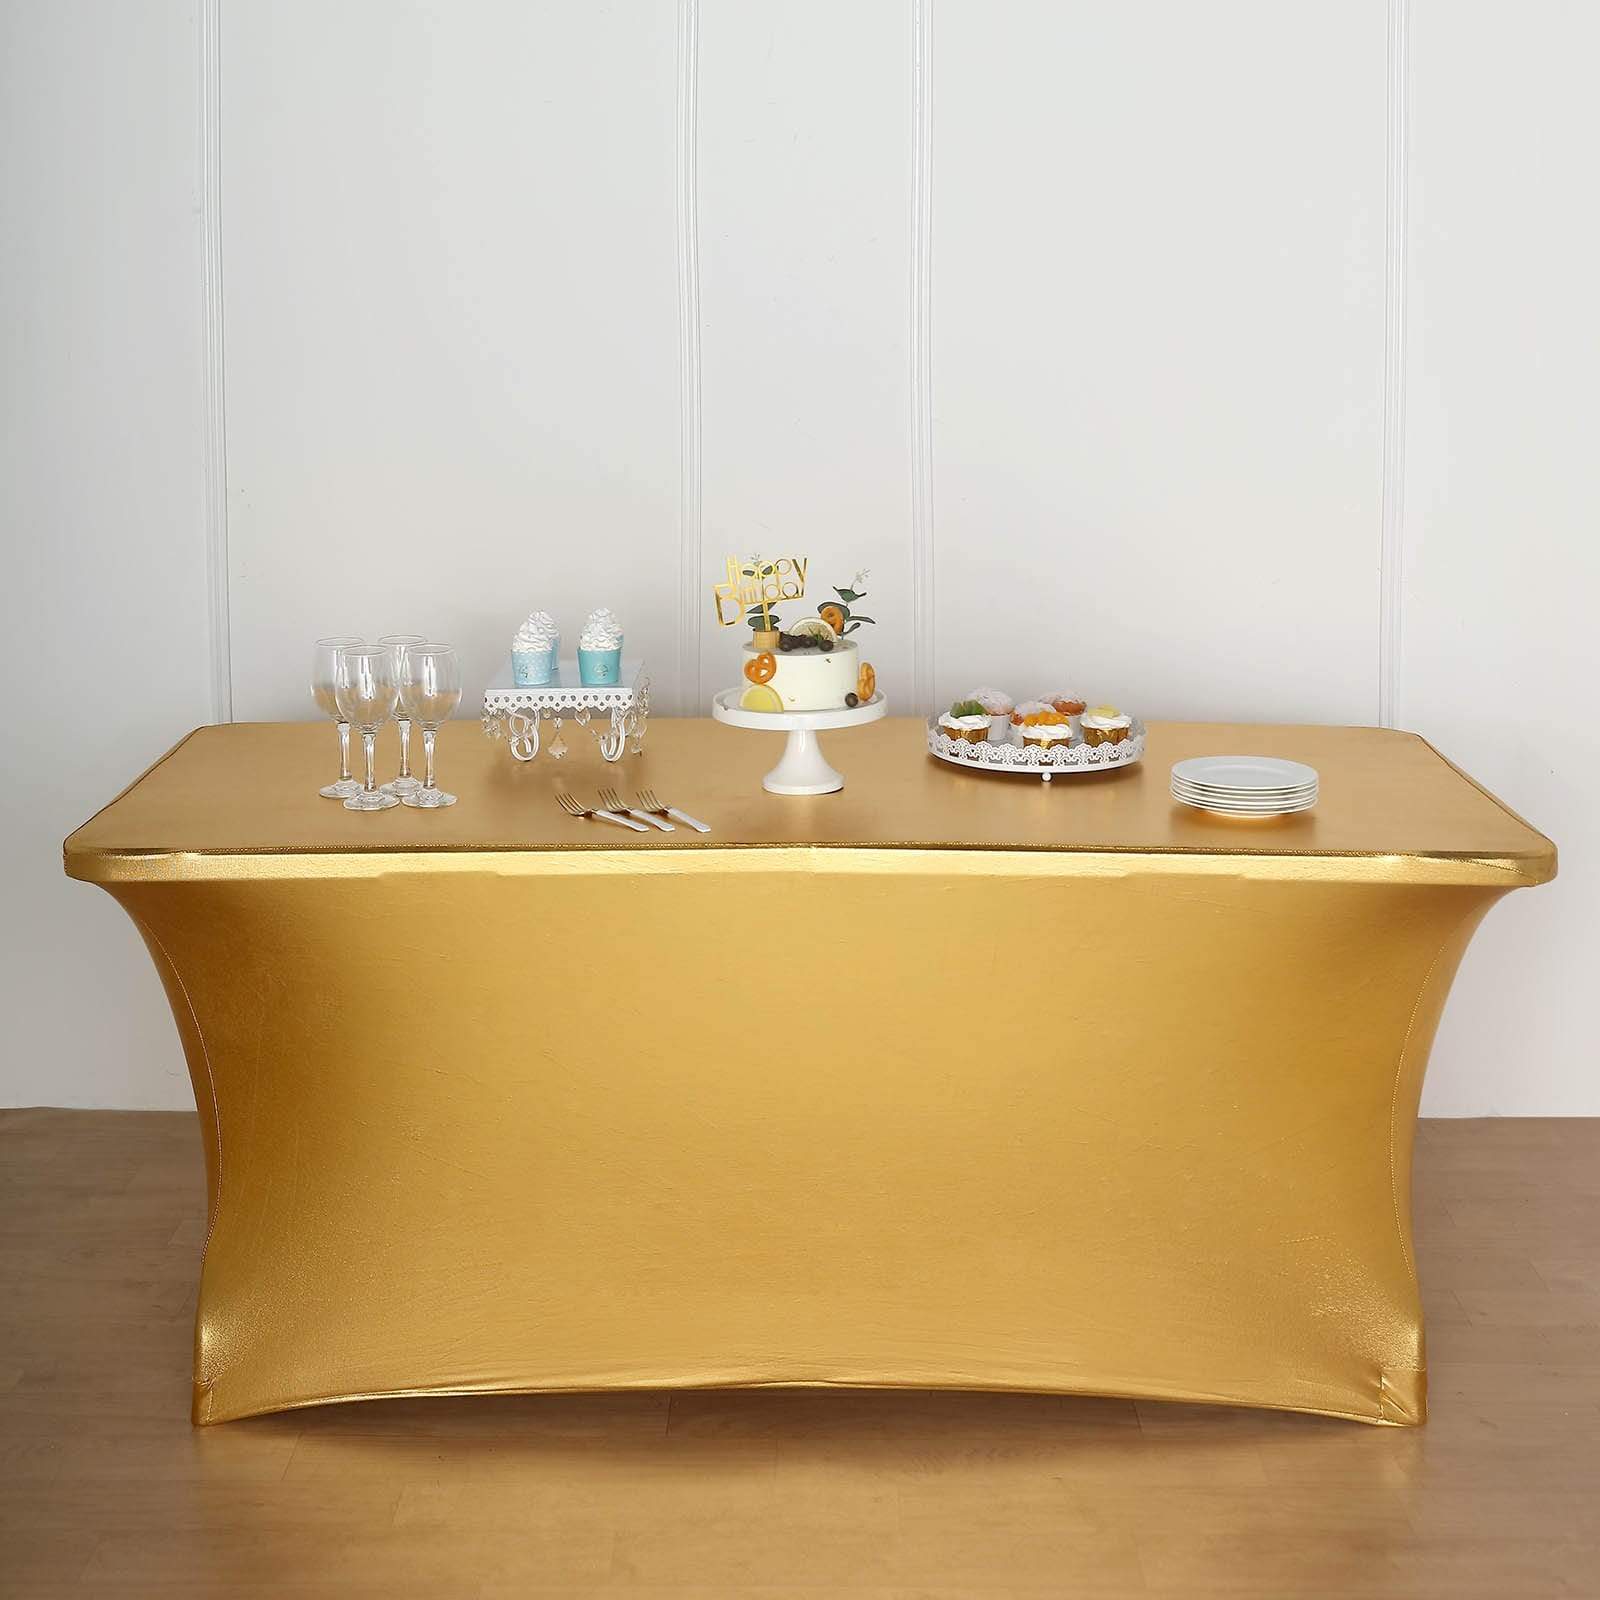 6 feet Fitted Spandex Rectangular Tablecloth Metallic Table Cover